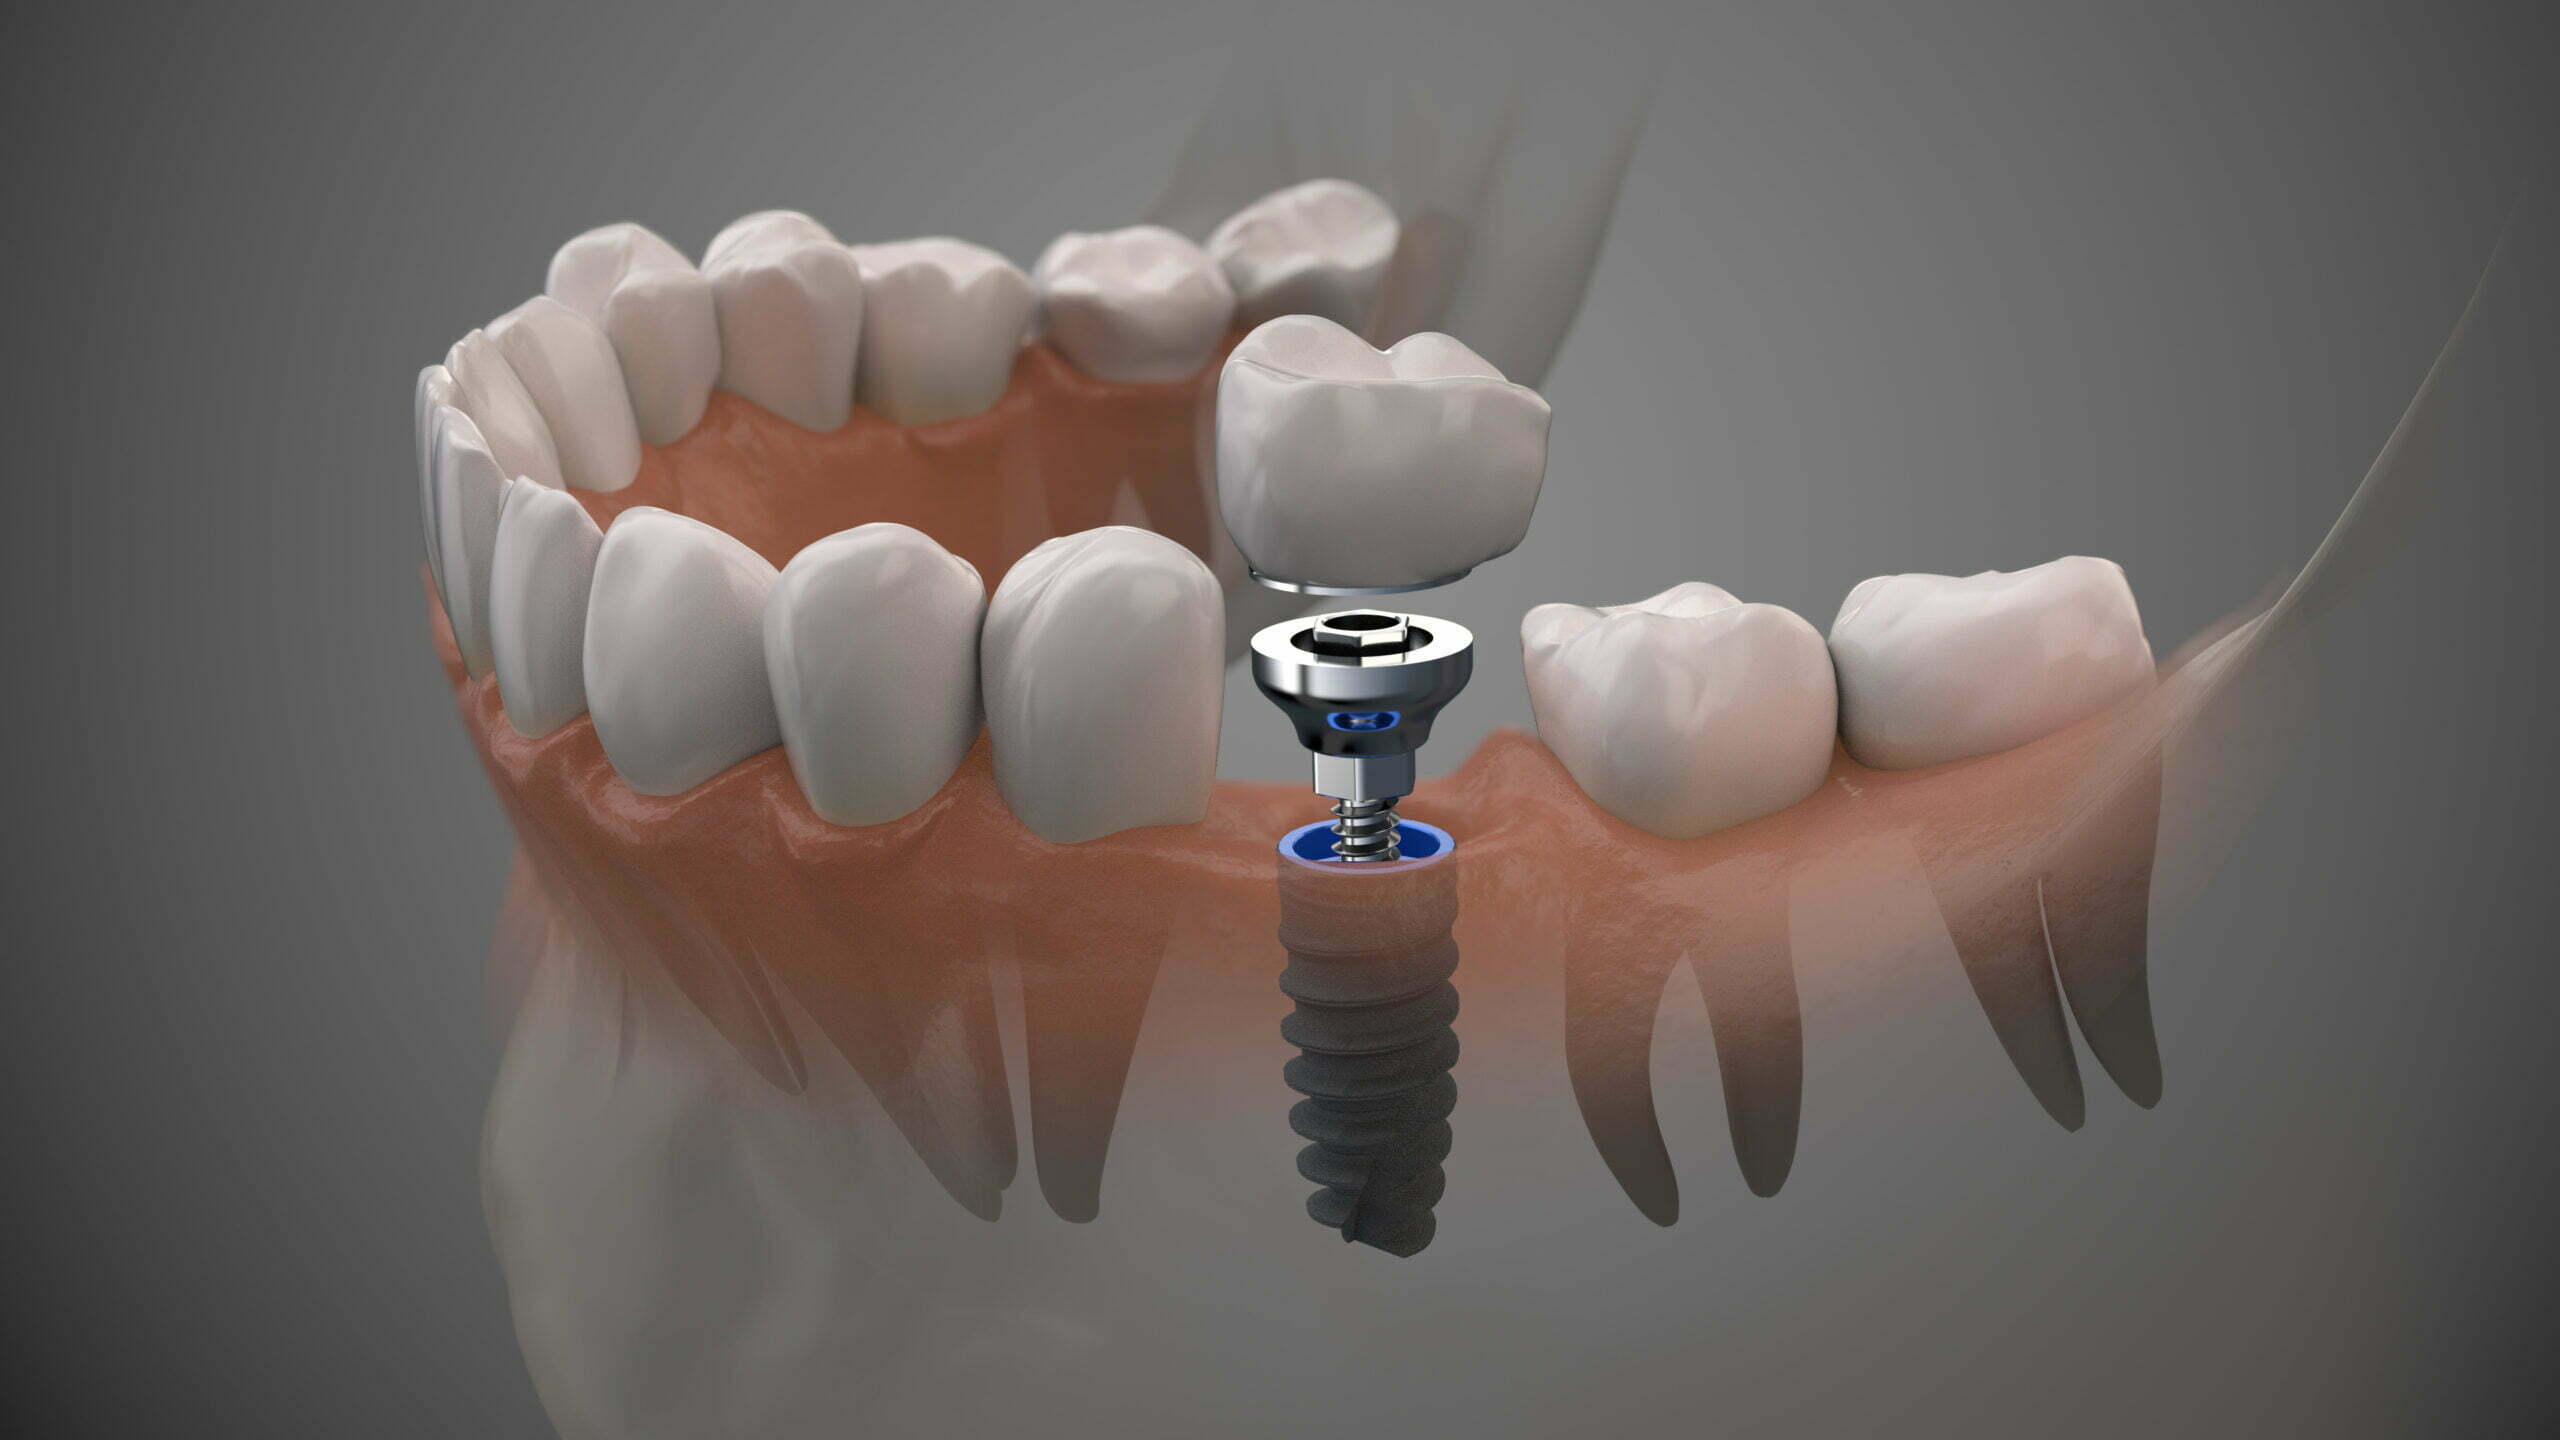 Tooth human implant. On1 concept.